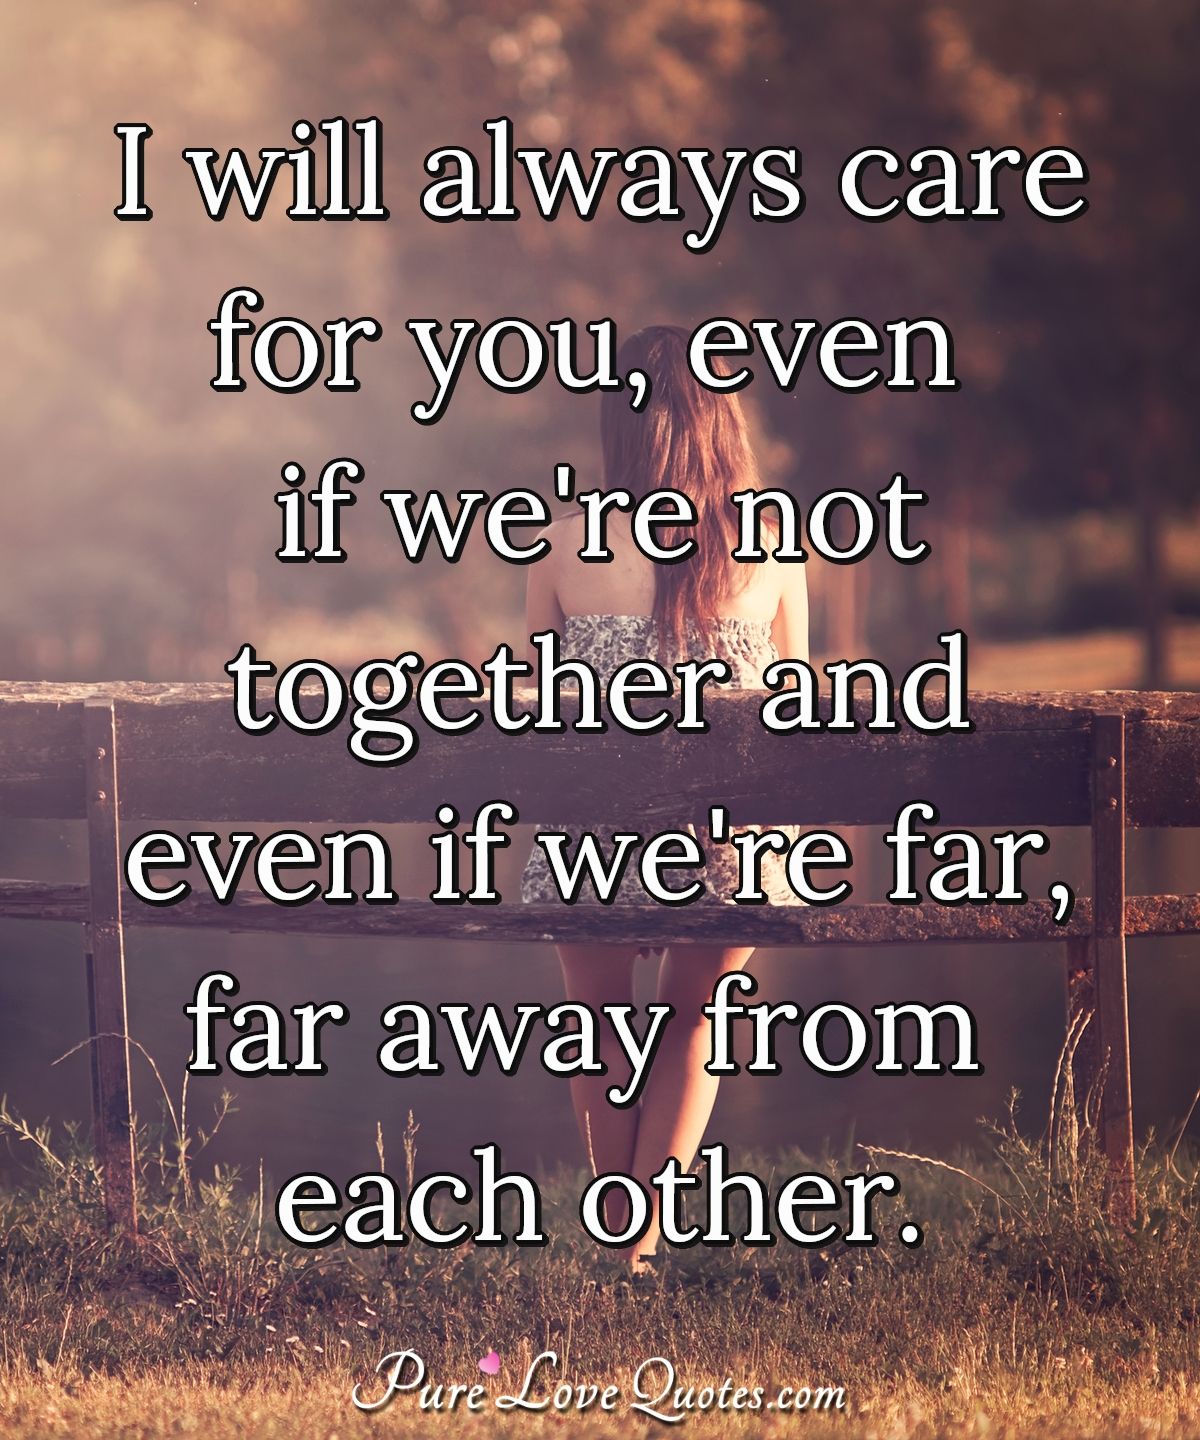 i will always care for you, even if we’re not together and even if we’re far, far away from each other.